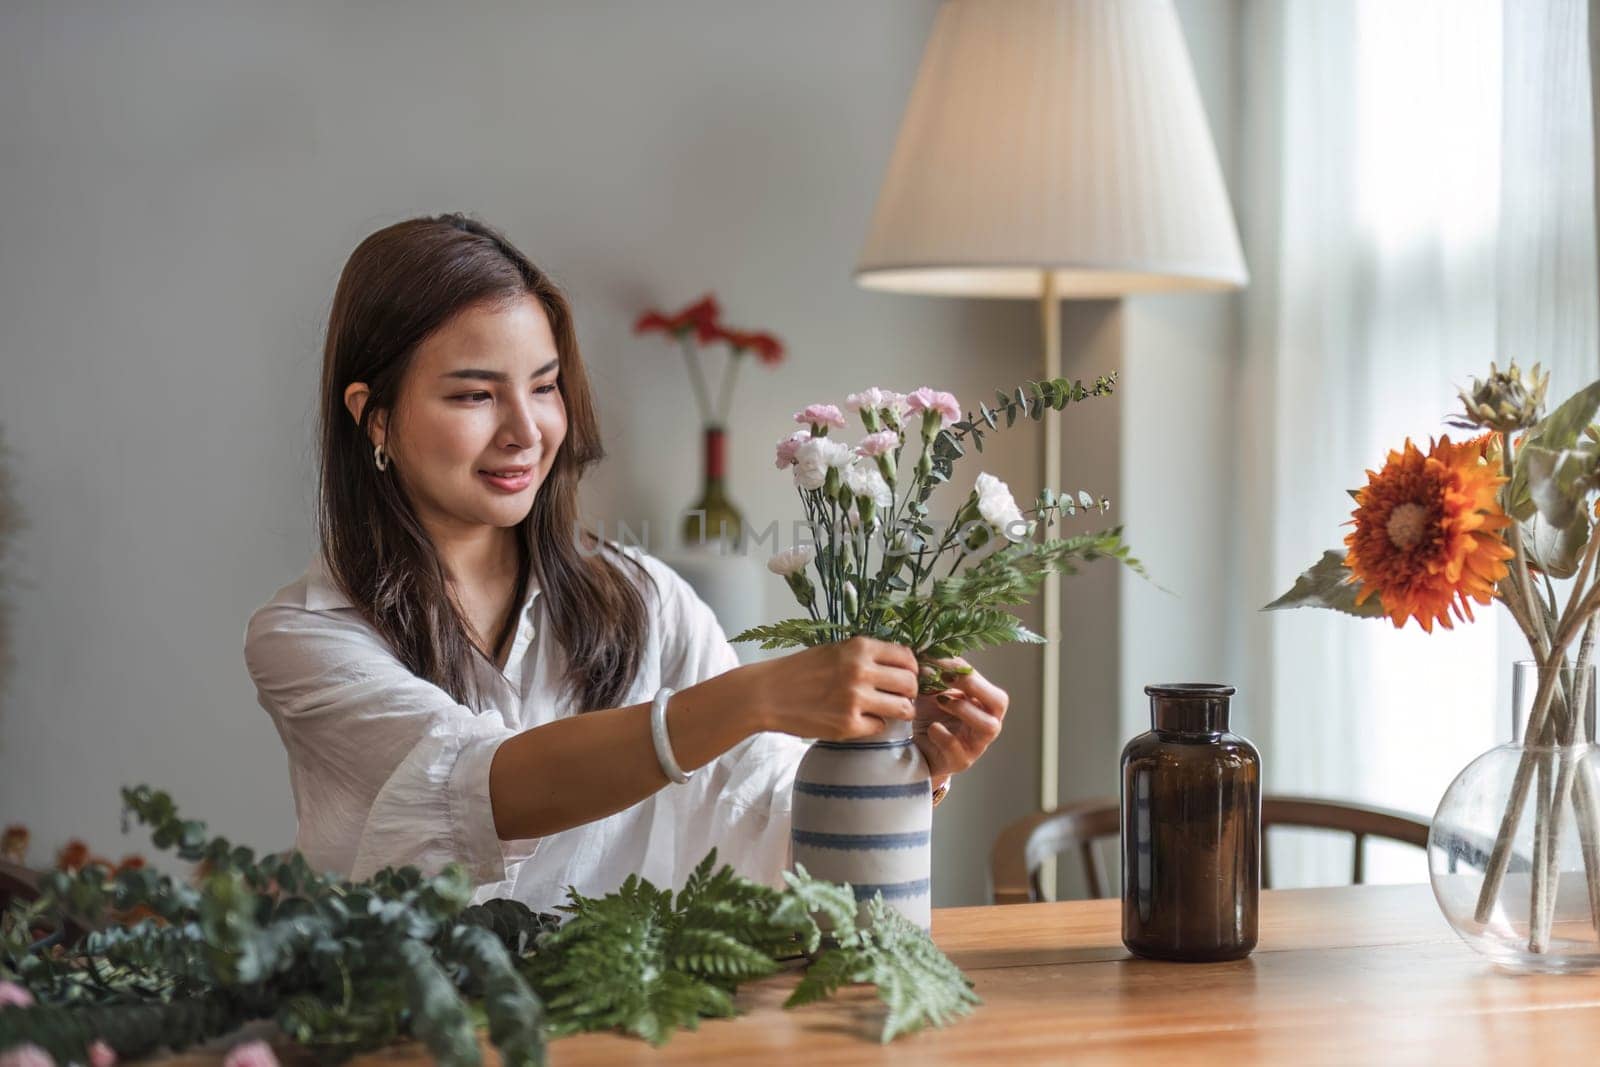 Attractive and happy young Asian woman enjoys arranging a vase with beautiful flowers in her minimal living room. Leisure and lifestyle concepts..